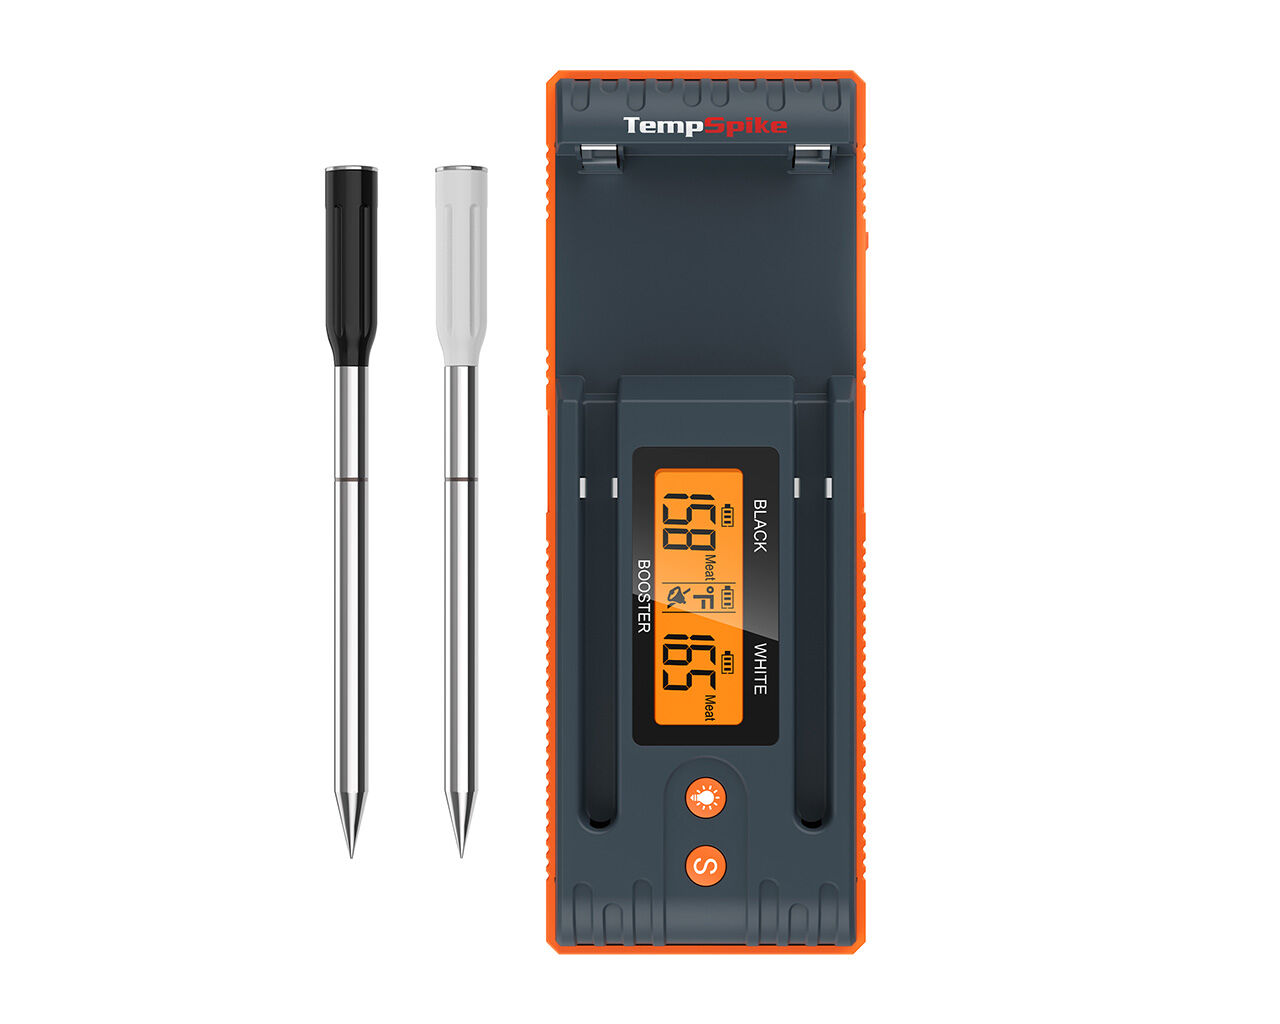 Infrared Thermometer - Eroma